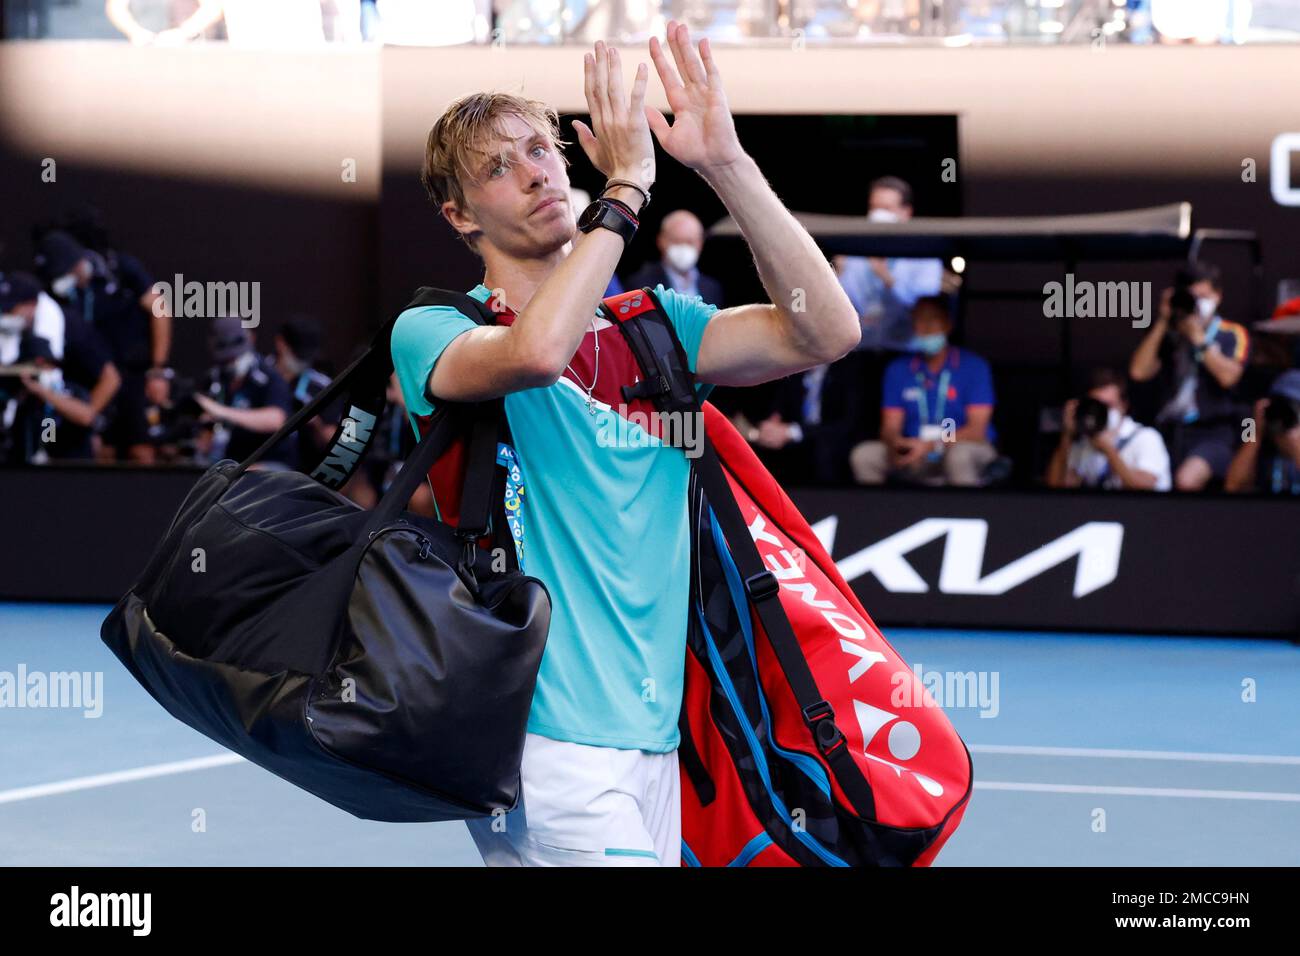 Denis Shapovalov of Canada gestures to the crowd following his defeat to Rafael Nadal of Spain during their quarterfinal match at the Australian Open tennis championships in Melbourne, Australia, Tuesday, Jan